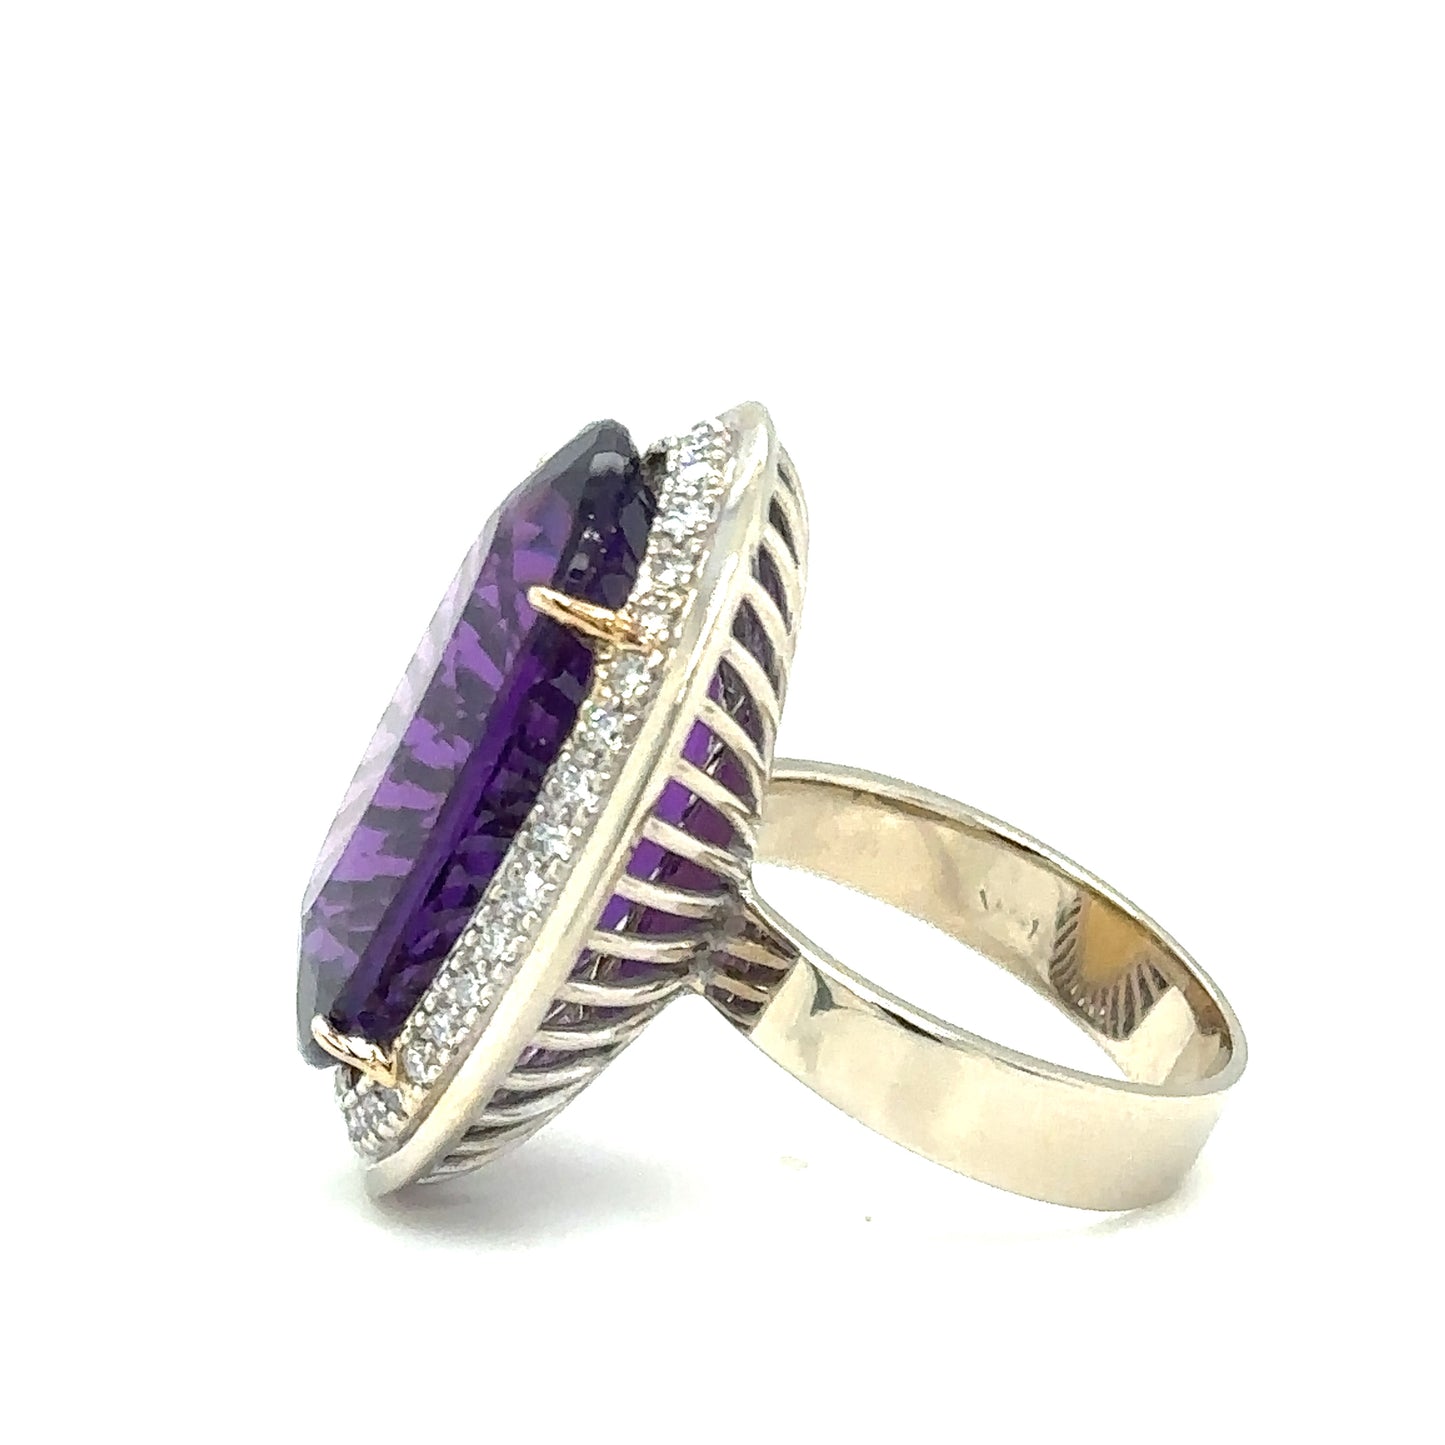 Circa 2000s Large Oval Brilliant Amethyst Ring with Diamonds in 14K Gold